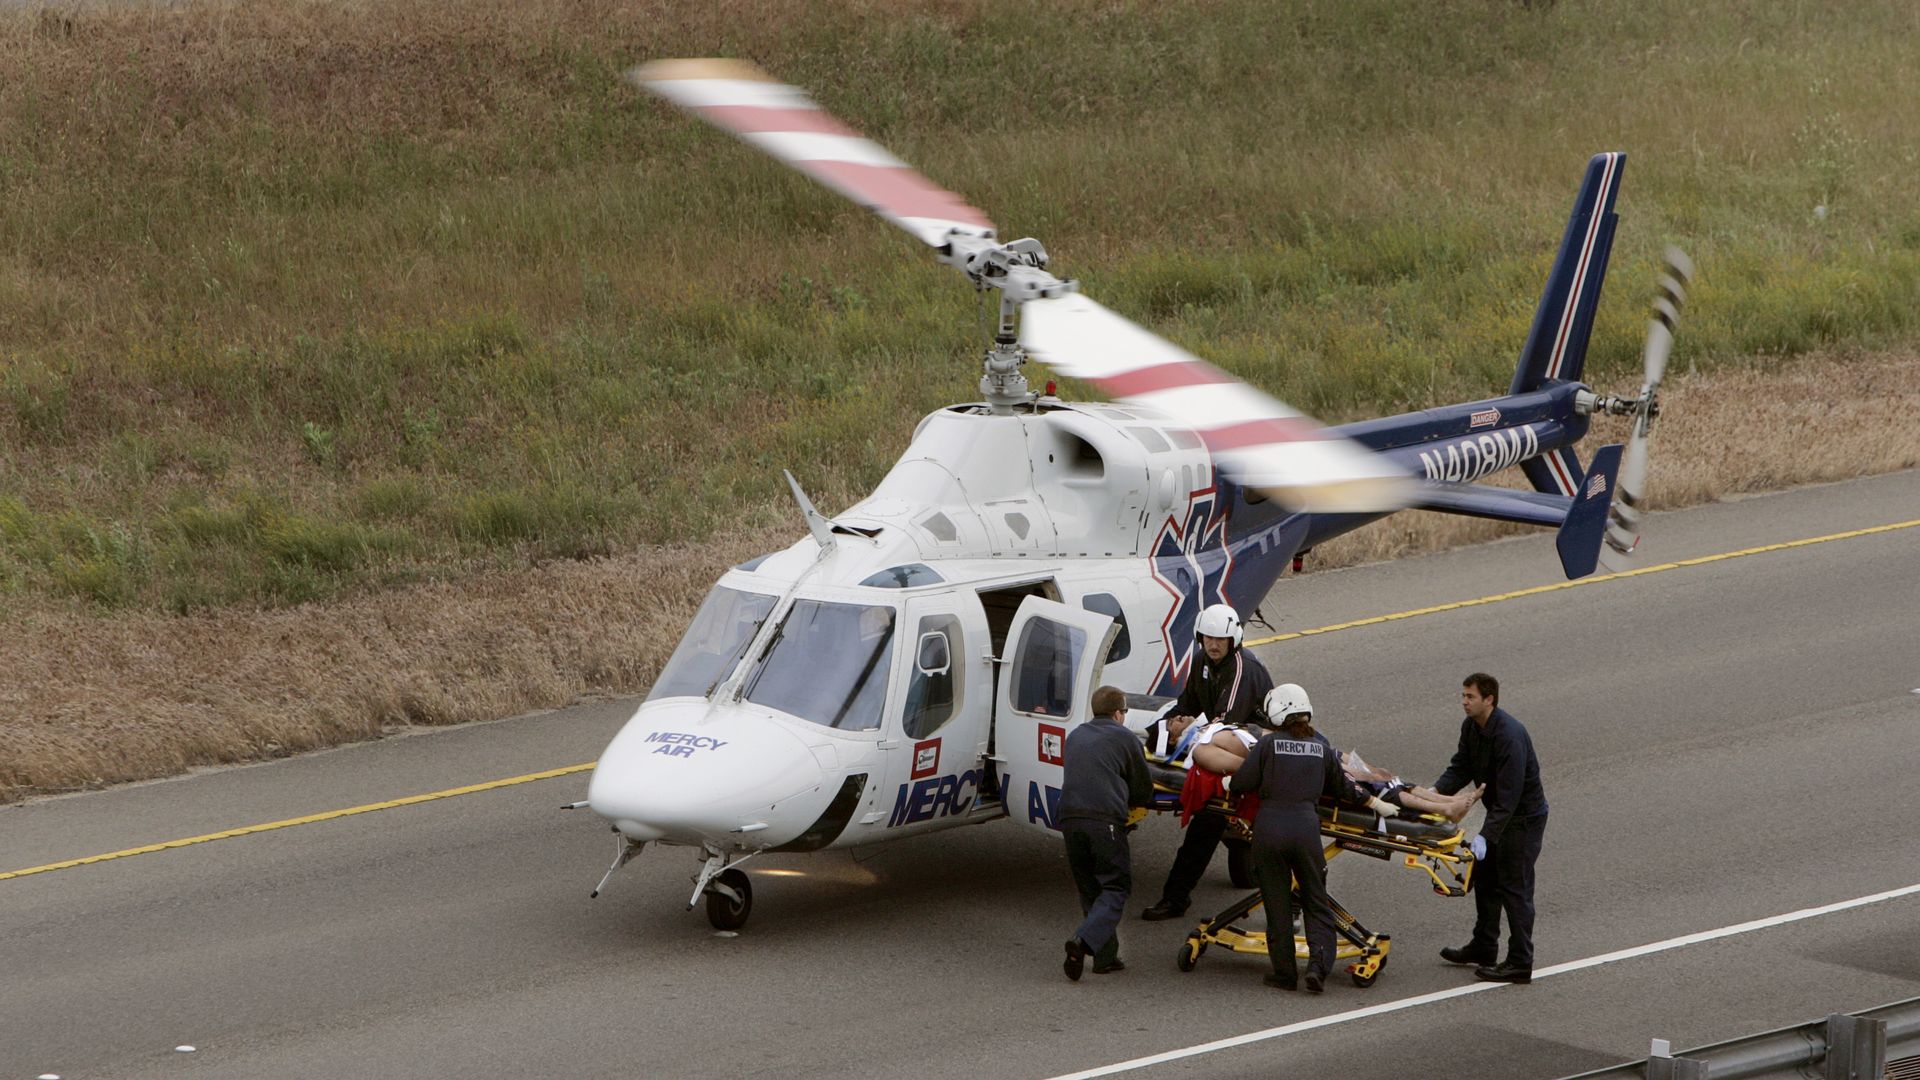 Crash victim being loaded into an air ambulance